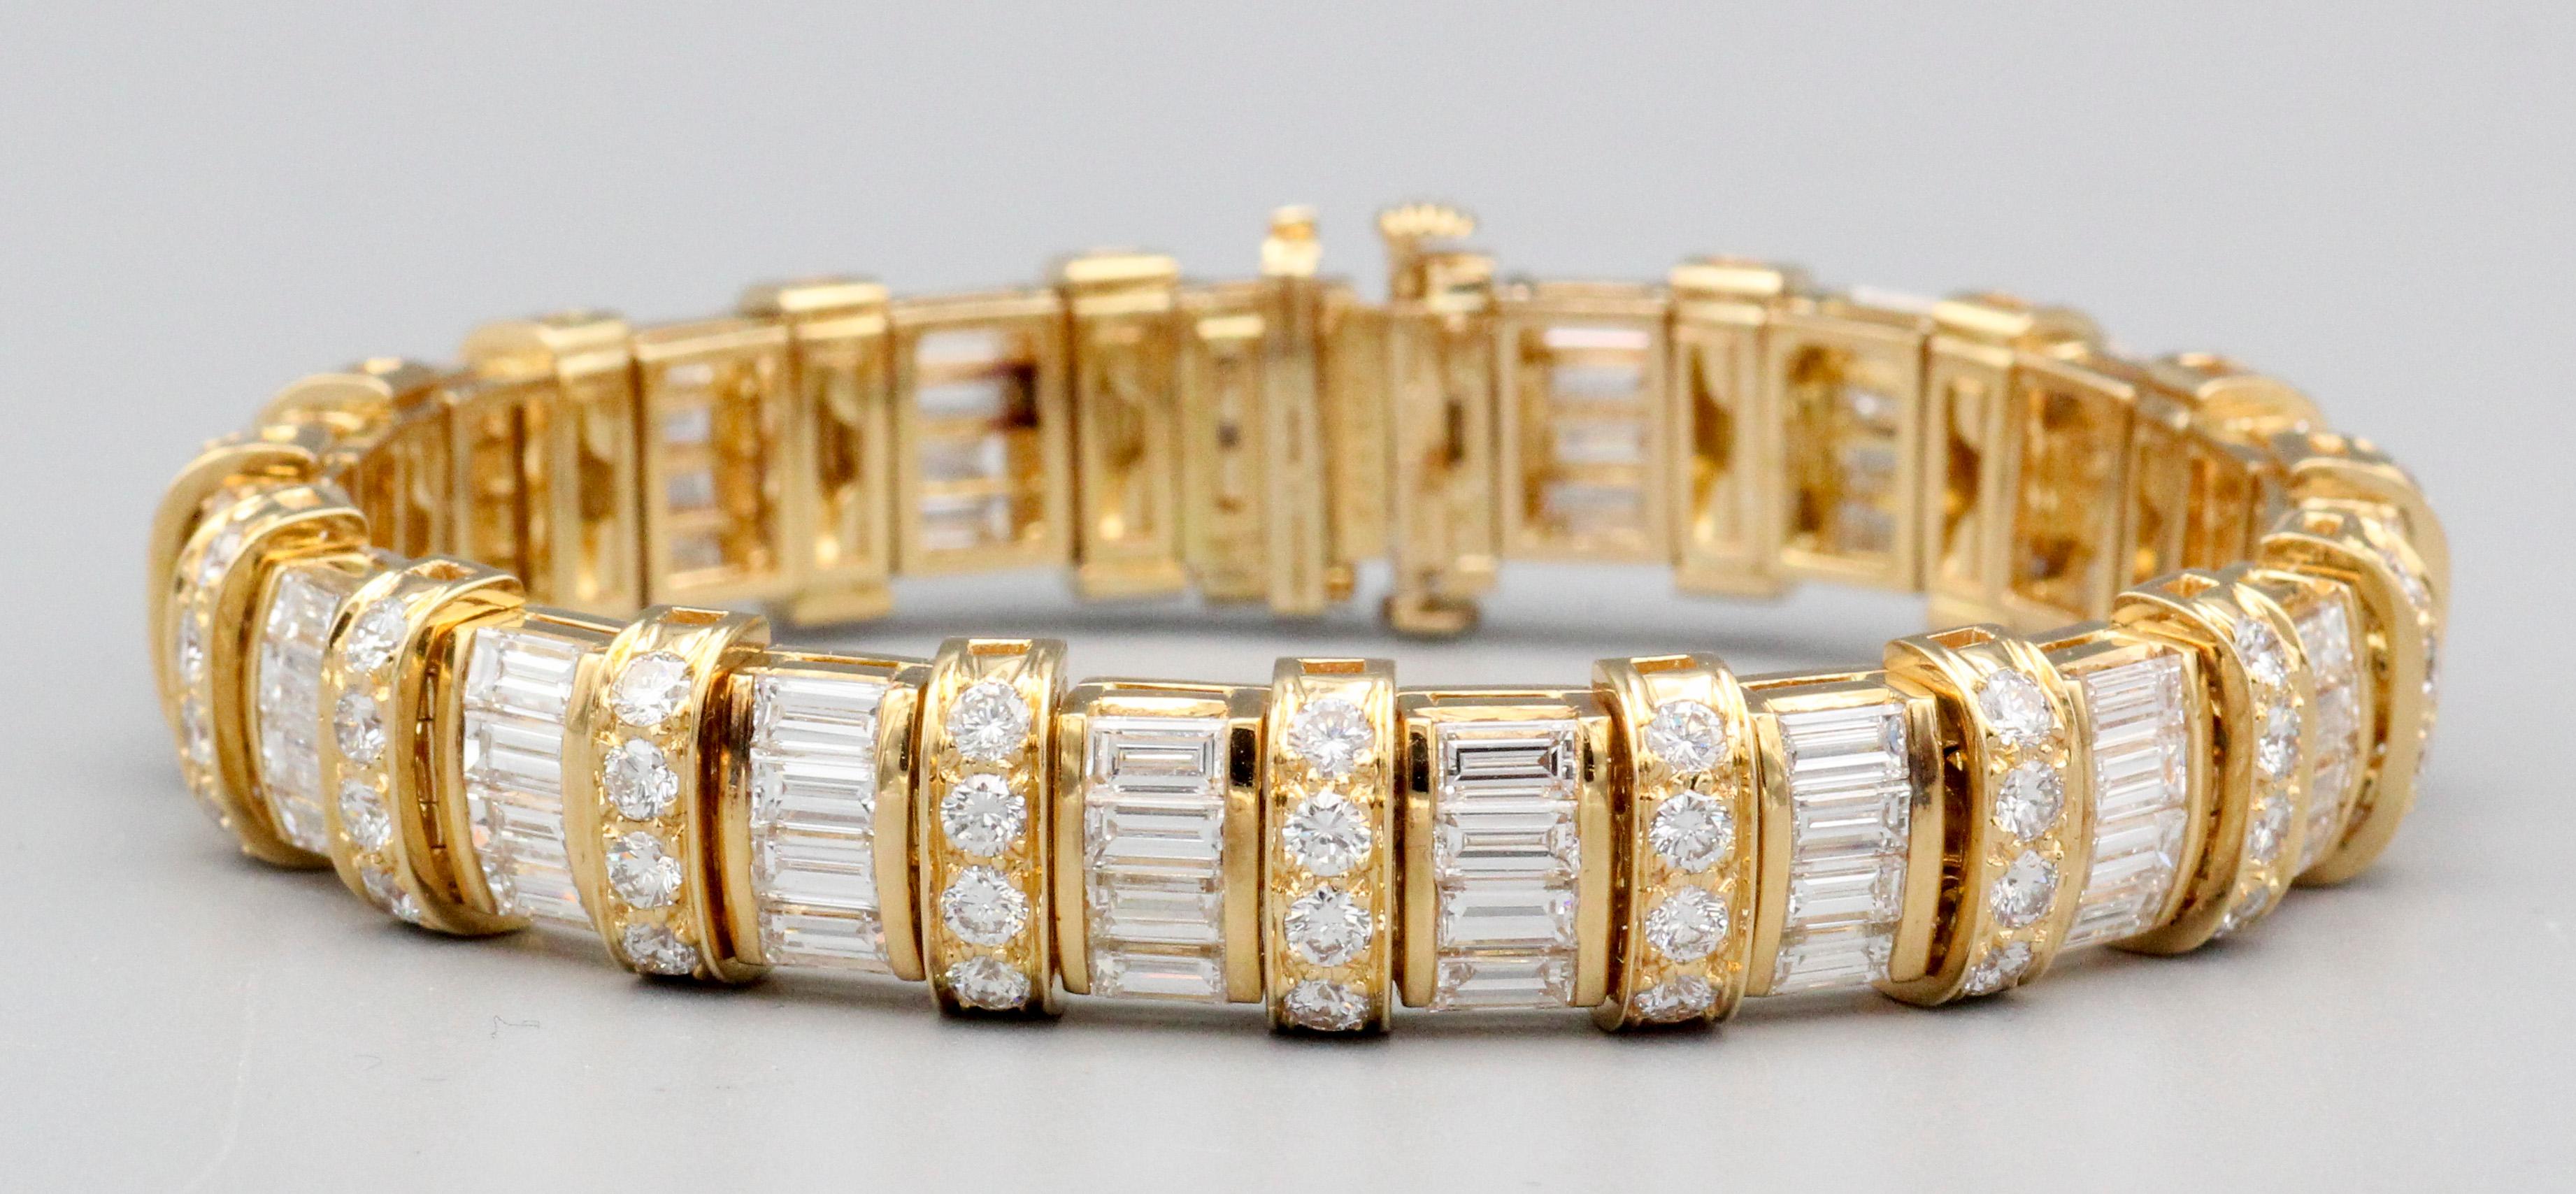 The Oscar Heyman Baguette and Brilliant Cut Diamond 18k Yellow Gold Bracelet is a masterpiece that epitomizes luxury, craftsmanship, and timeless elegance. Oscar Heyman, known for its exceptional jewelry creations, has likely crafted this bracelet